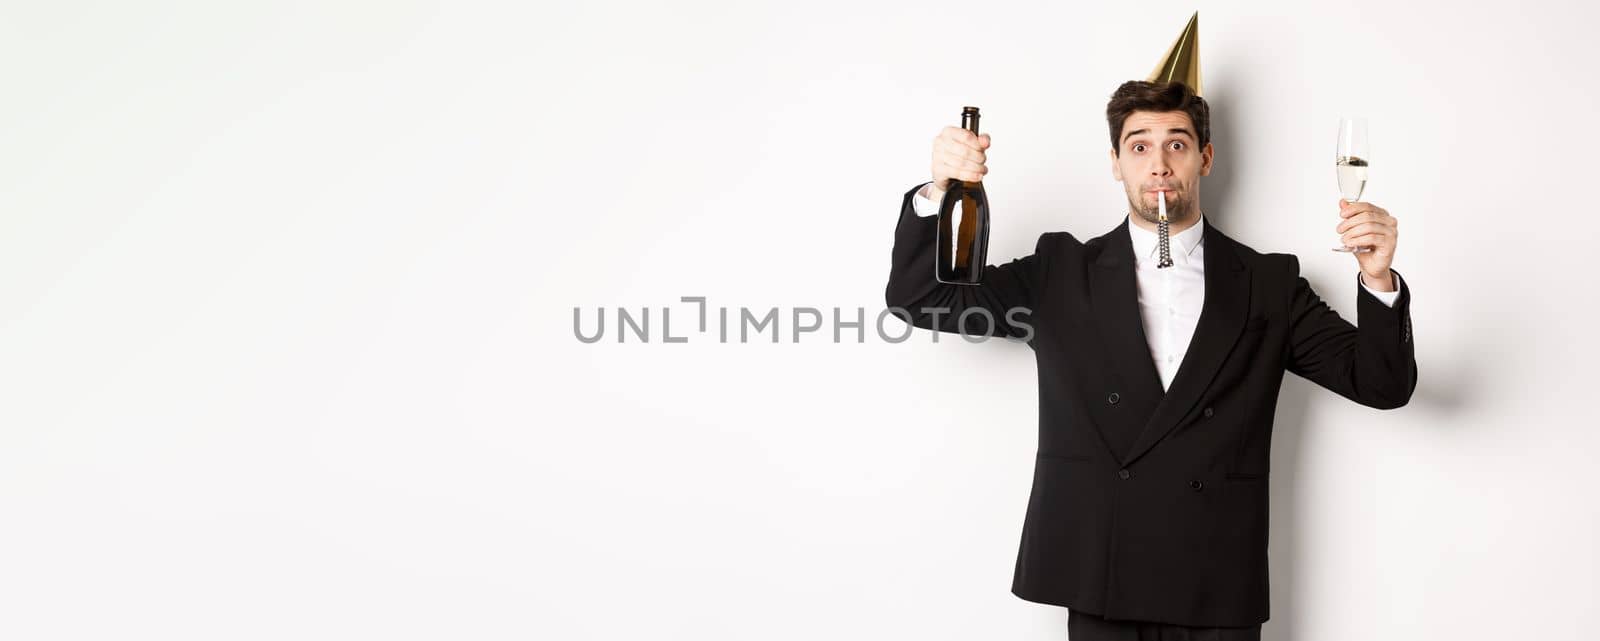 Concept of holidays and lifestyle. Handsome guy celebrating birthday, blowing party whistle and holding champagne, saying a toast, standing in suit over white background.